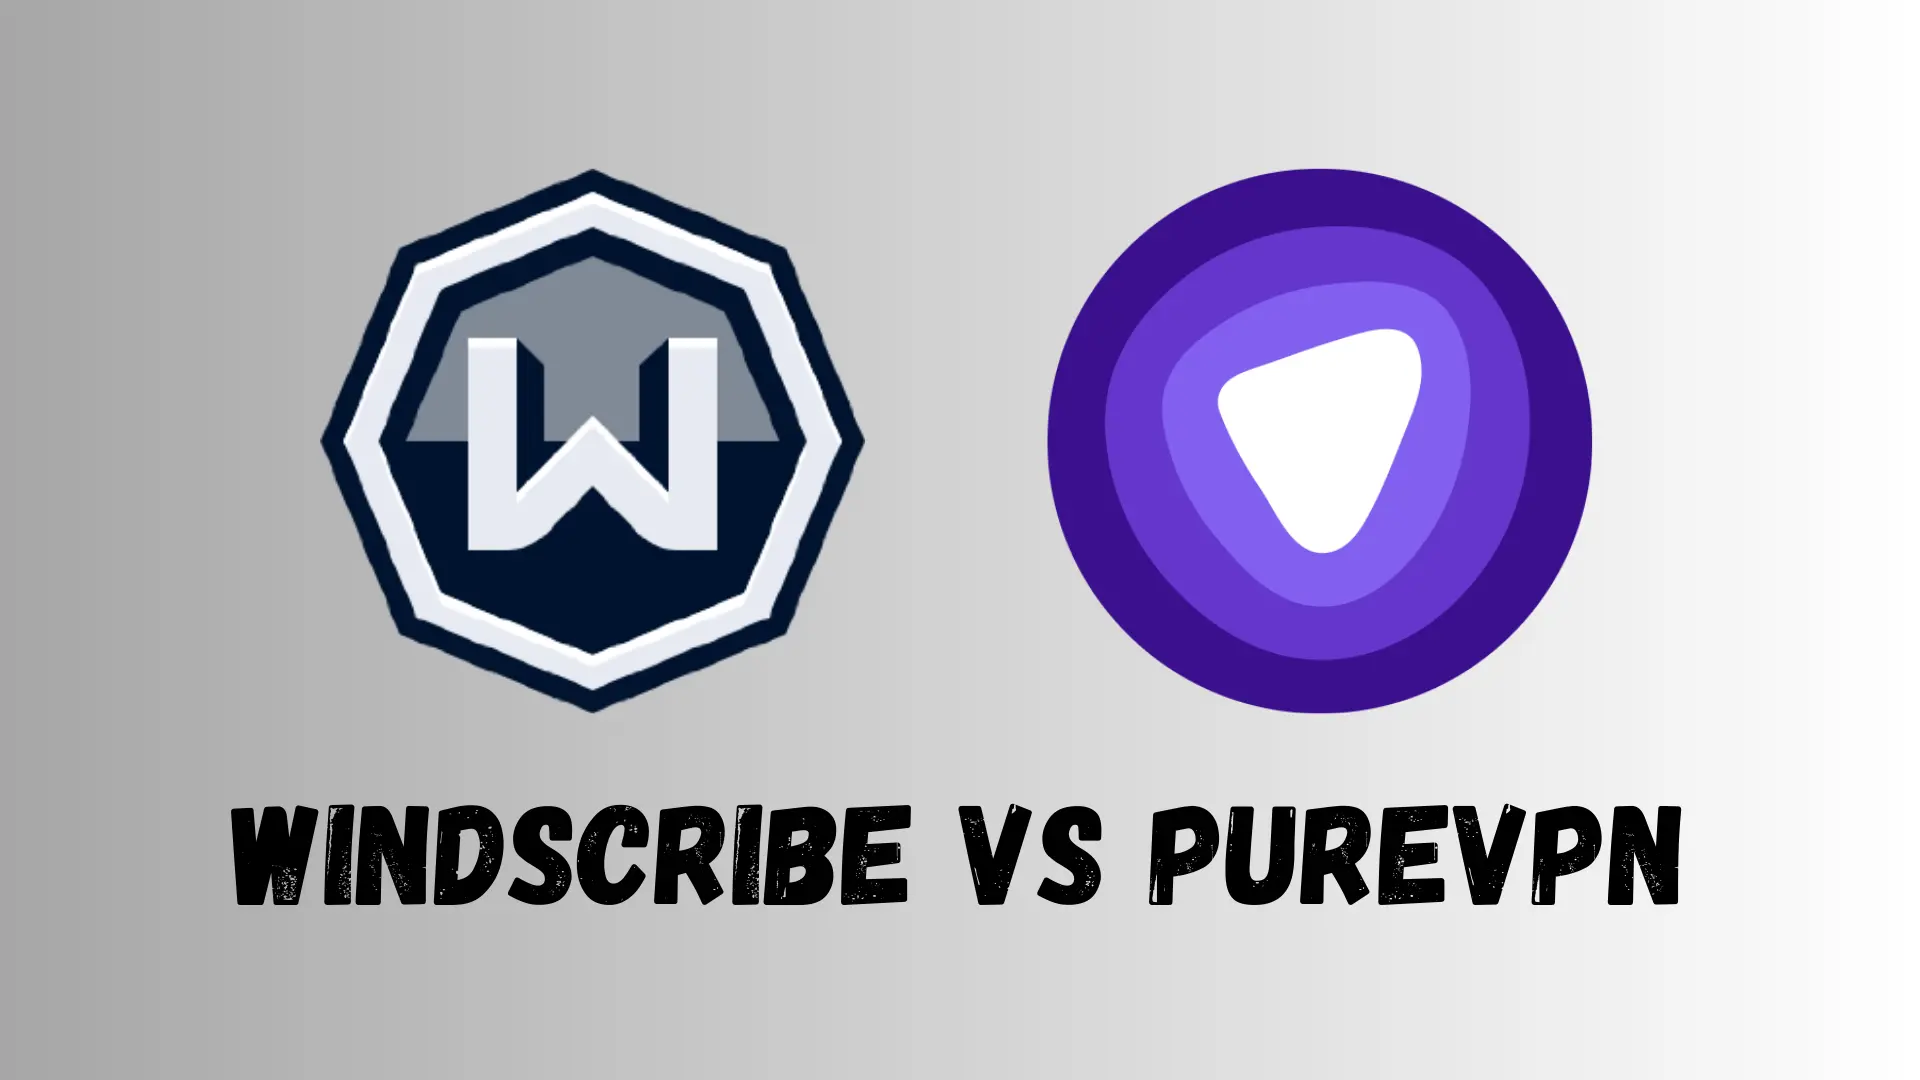 Windscribe vs PureVPN – Which One is Better?